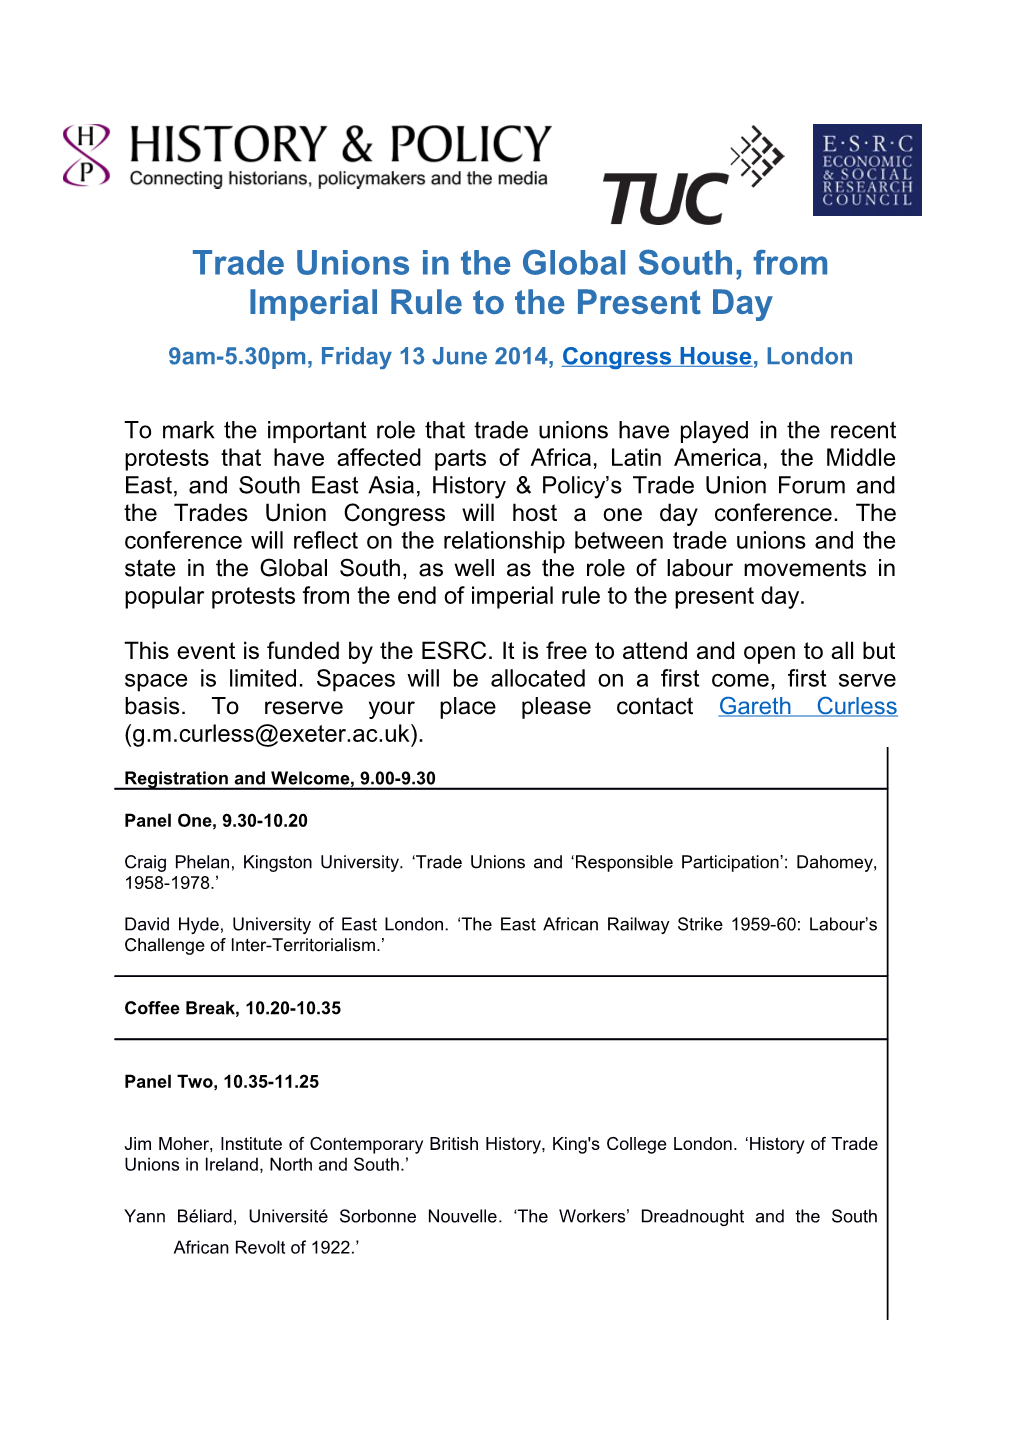 Trade Unions in the Global South, from Imperial Rule to the Present Day